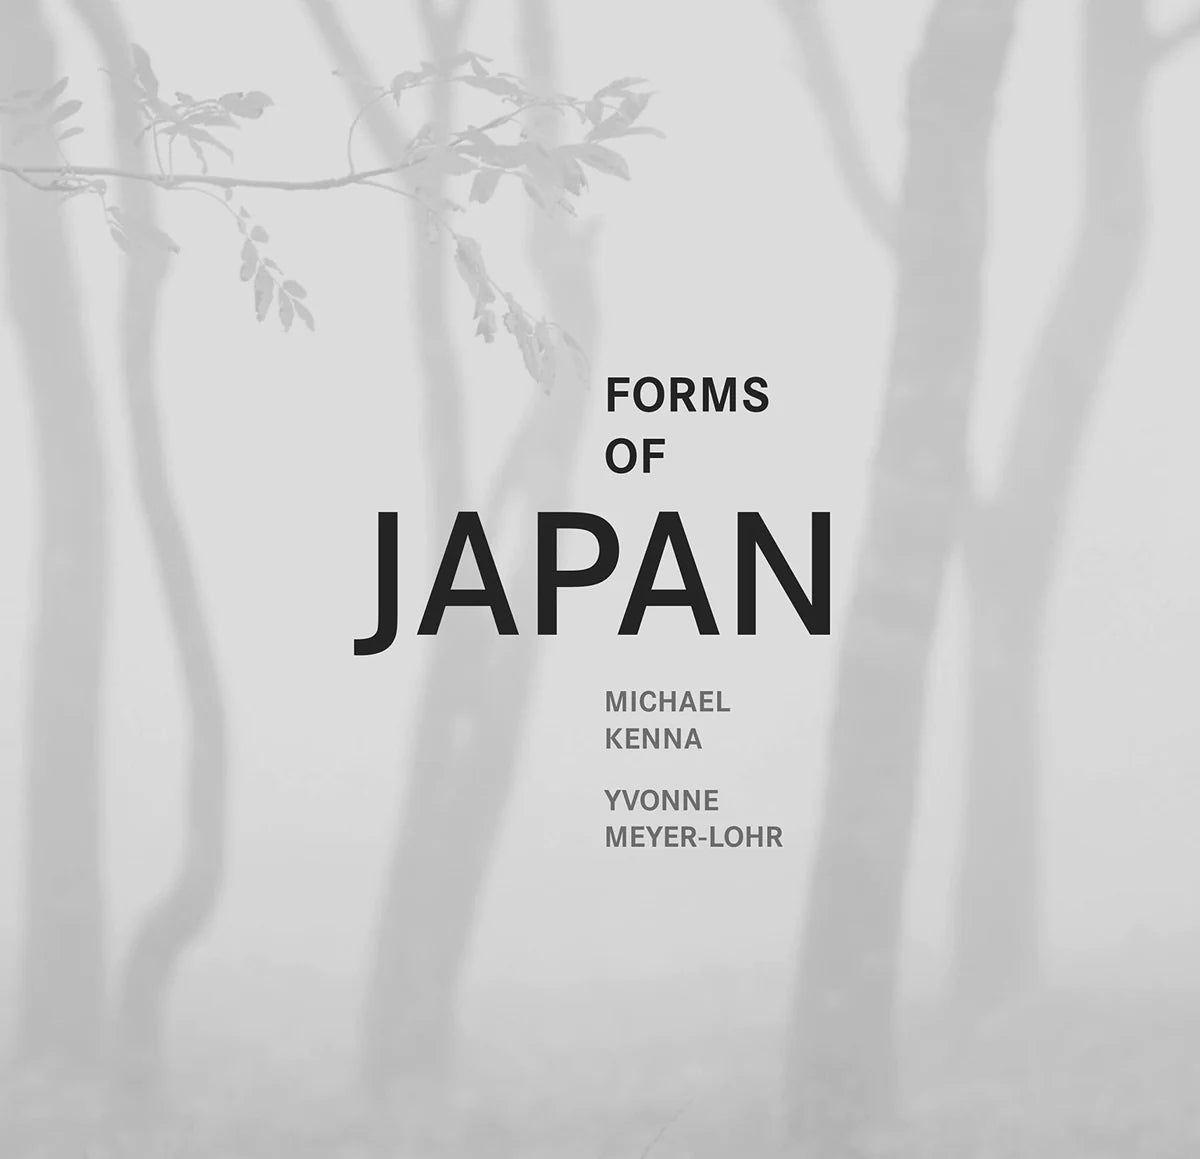 Forms of japan by Michael Kennas